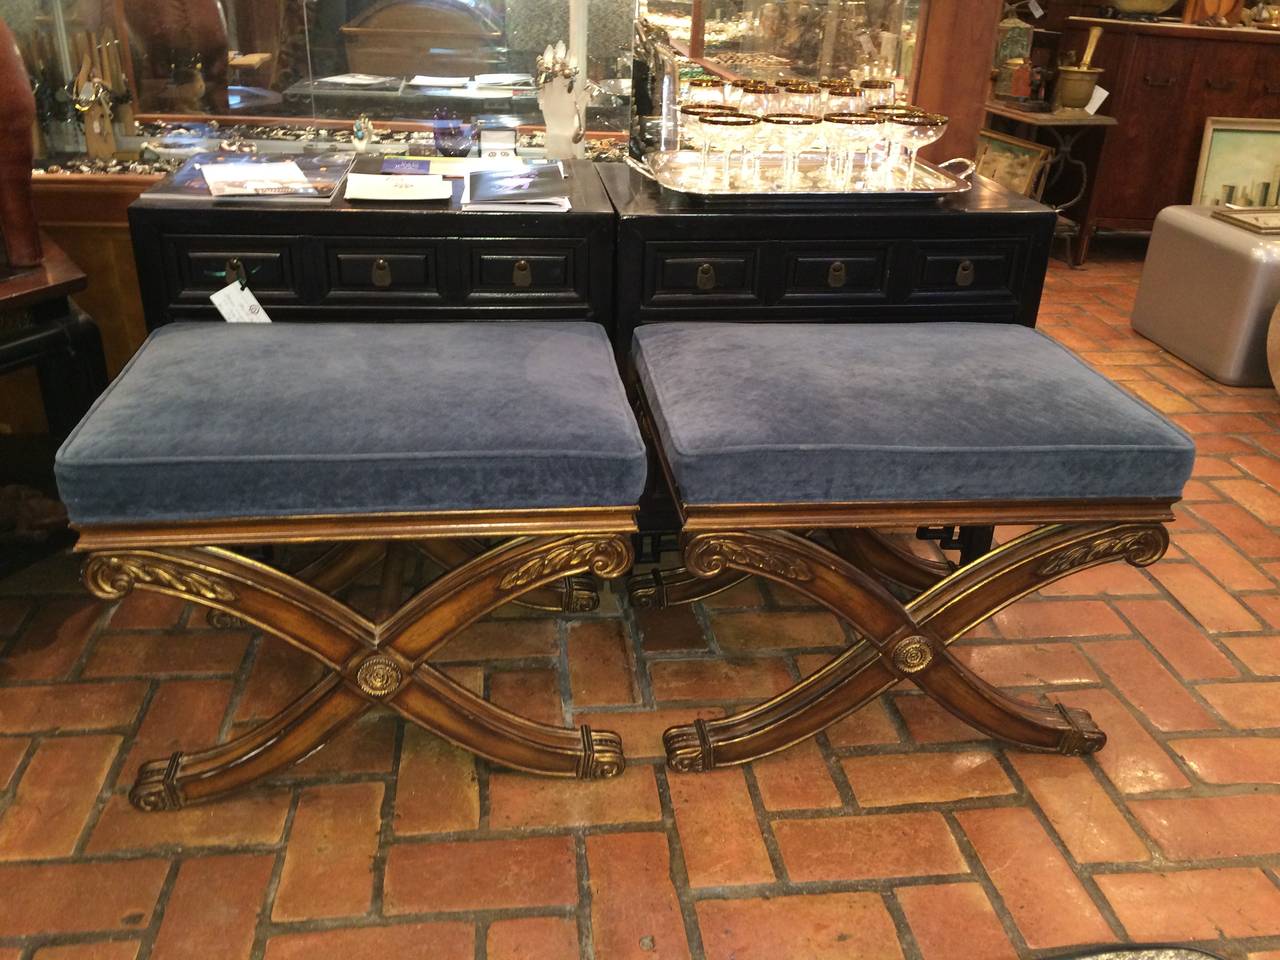 Pair of Ethan Allen French Regency X-base footstools. These stools have traditional styling with Classic design details. Blue gray velvet like upholstery top these stools.